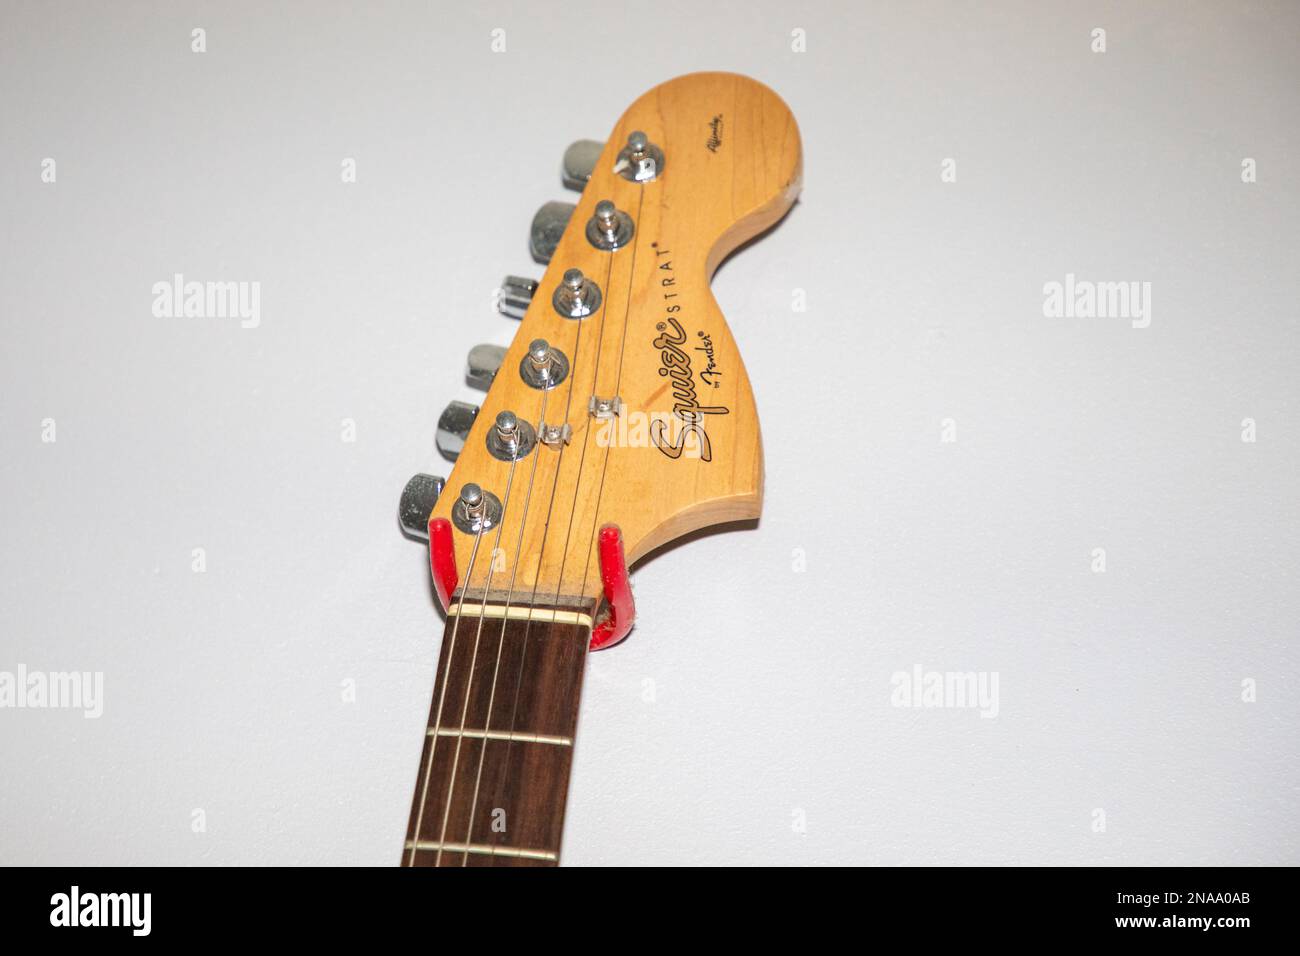 Bordeaux , Aquitaine  France - 06 02 2023 : Fender squier strat Guitar brand logo and text sign electric guitar head detail Stock Photo